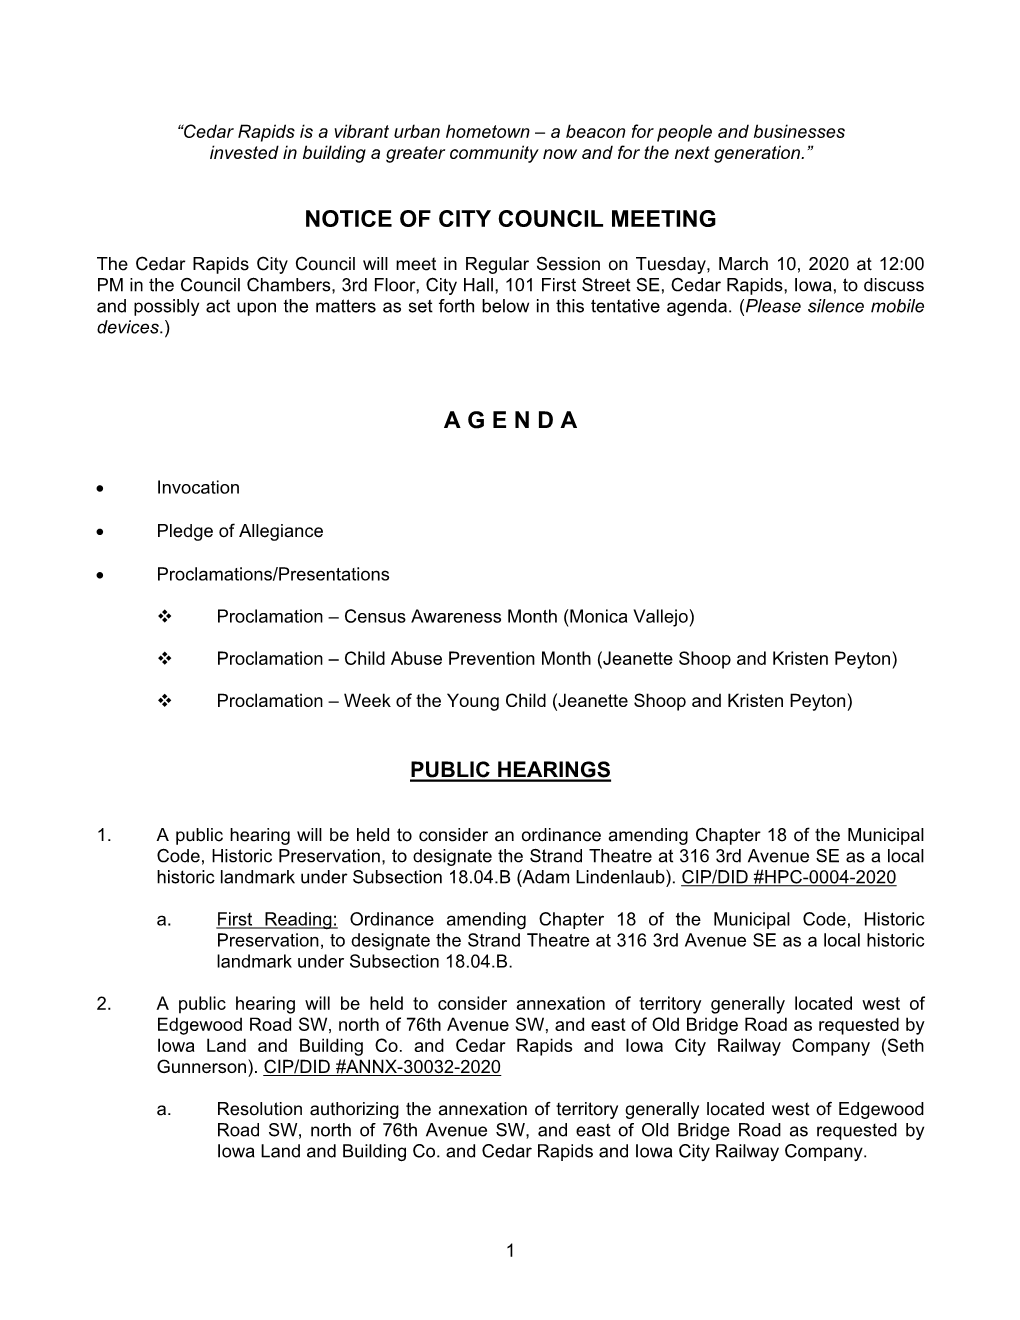 Notice of City Council Meeting a G E N